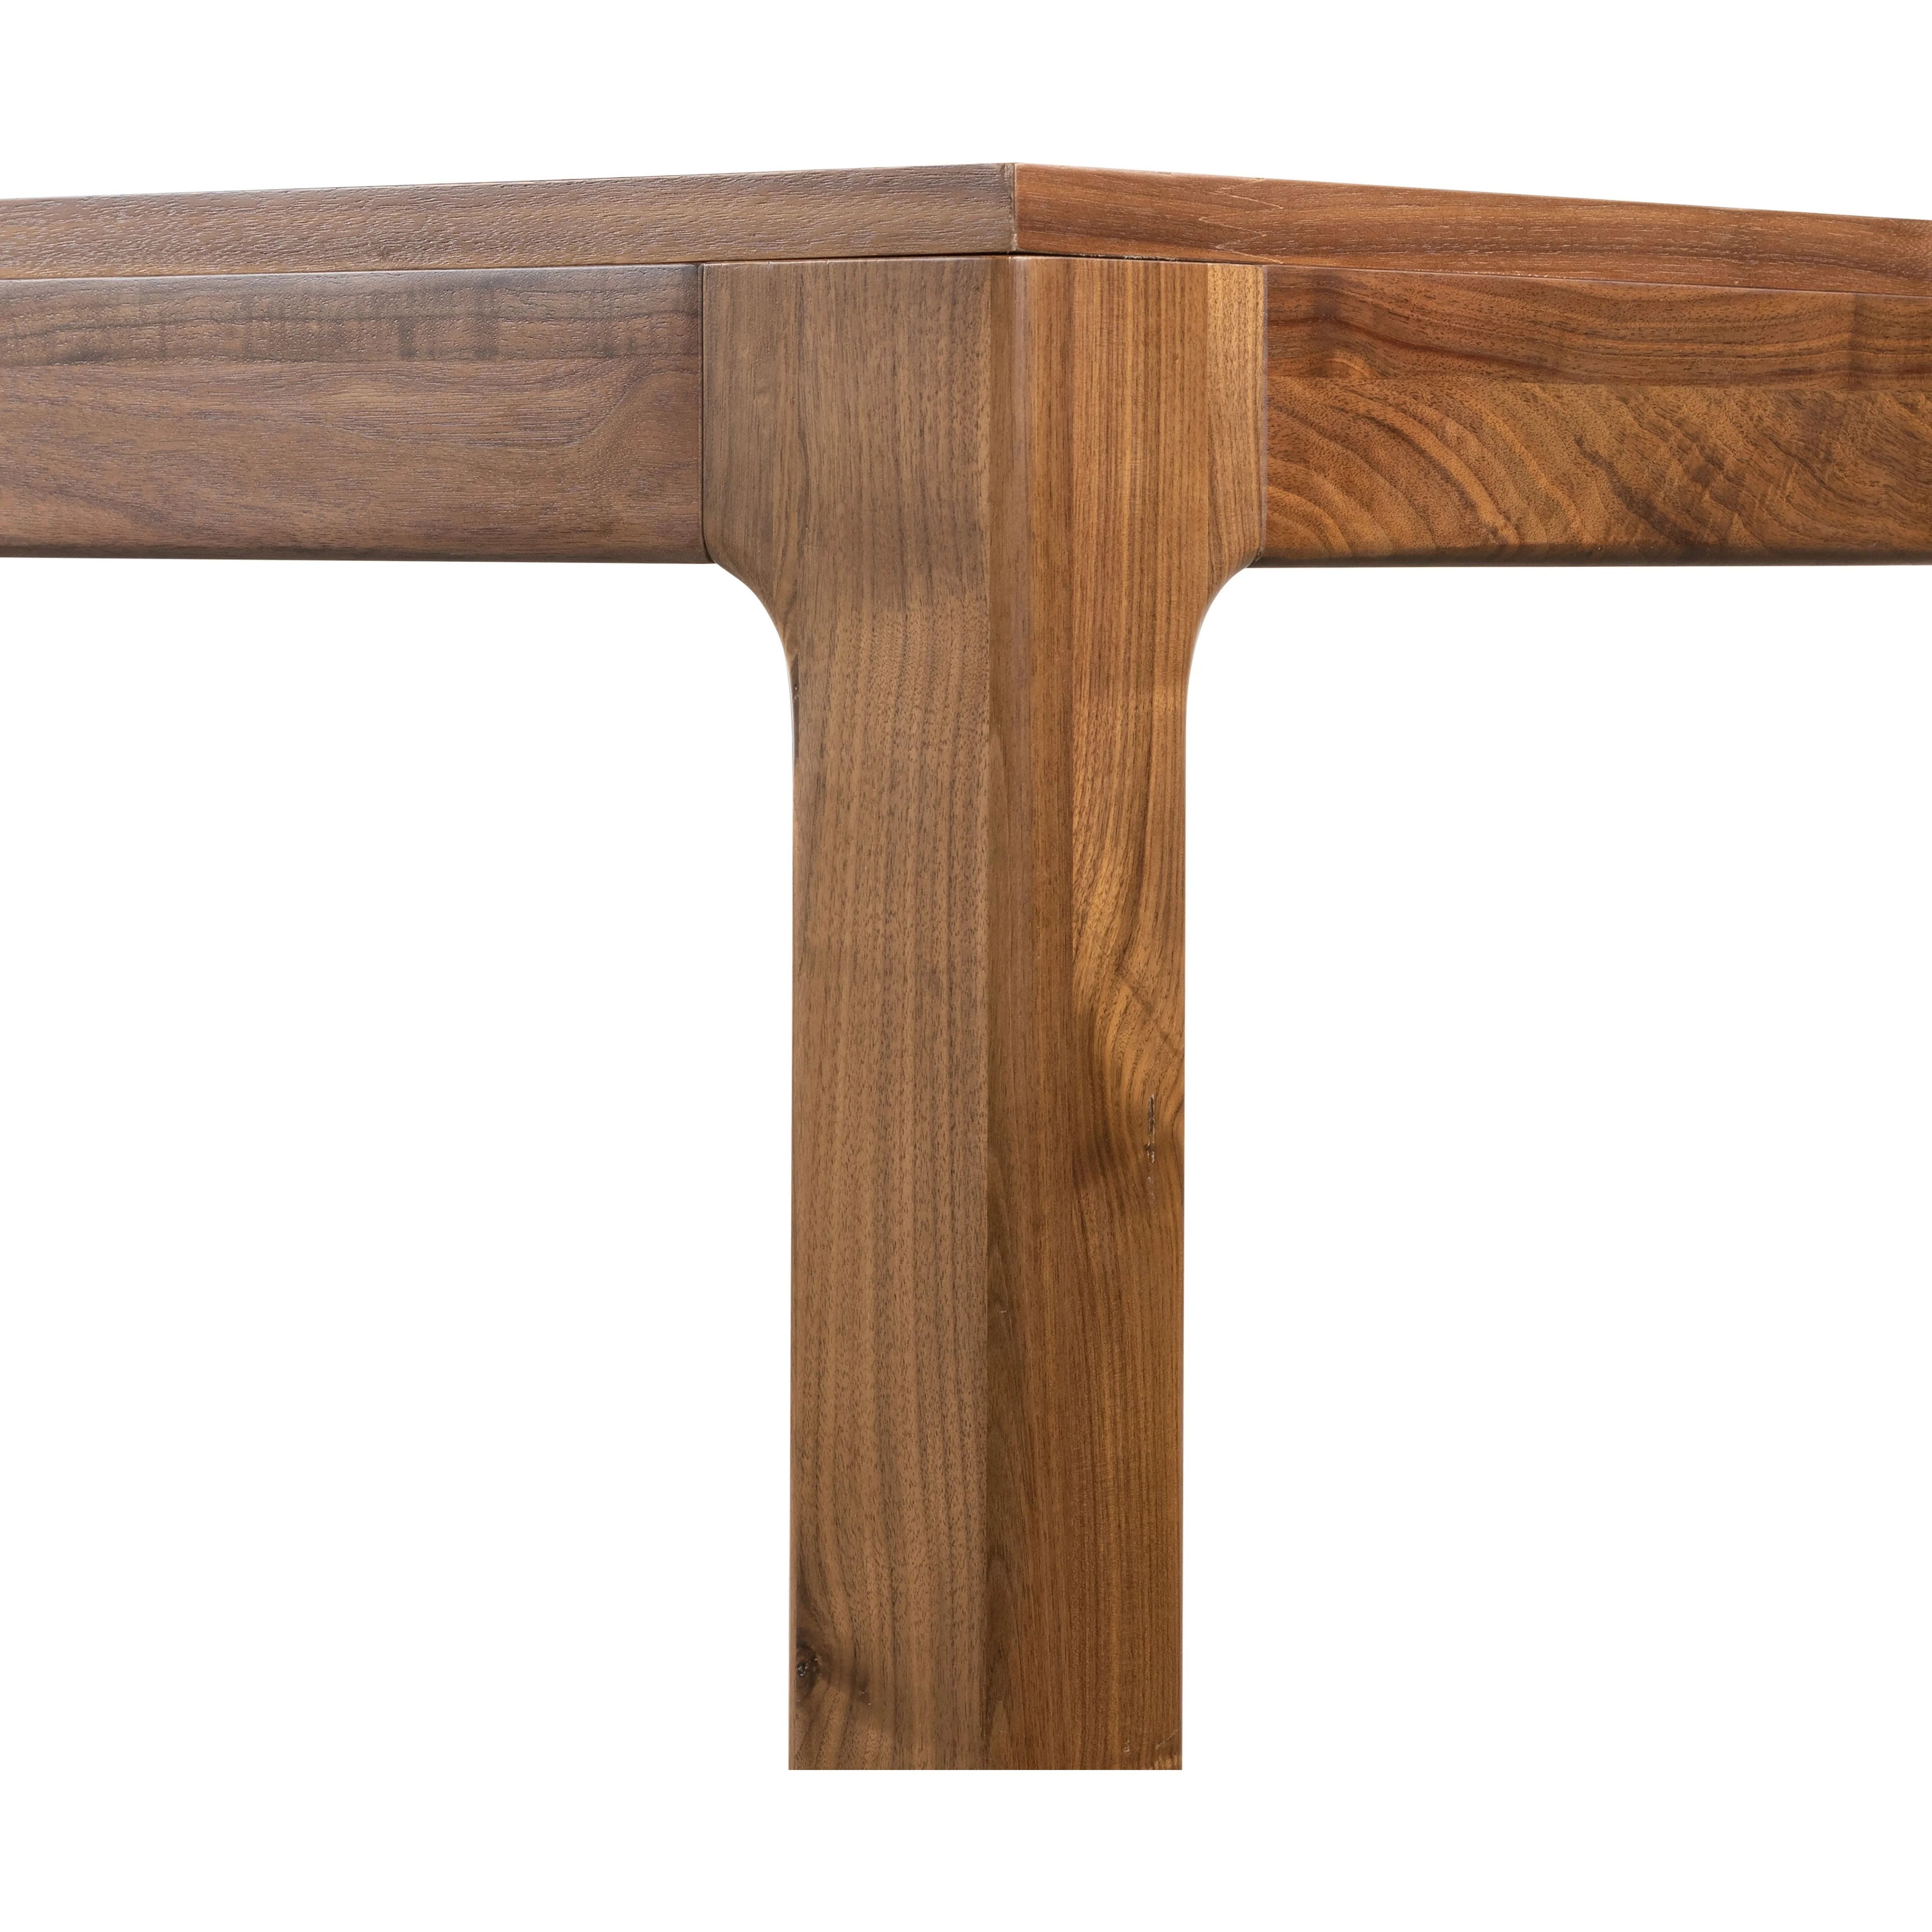 Inspired by campaign-style furniture of the 1800s â€” packable pieces first designed for traveling military use â€” a simply shaped dining table of natural walnut features a subtly inset top and rounded legs Amethyst Home provides interior design, new home construction design consulting, vintage area rugs, and lighting in the Laguna Beach metro area.